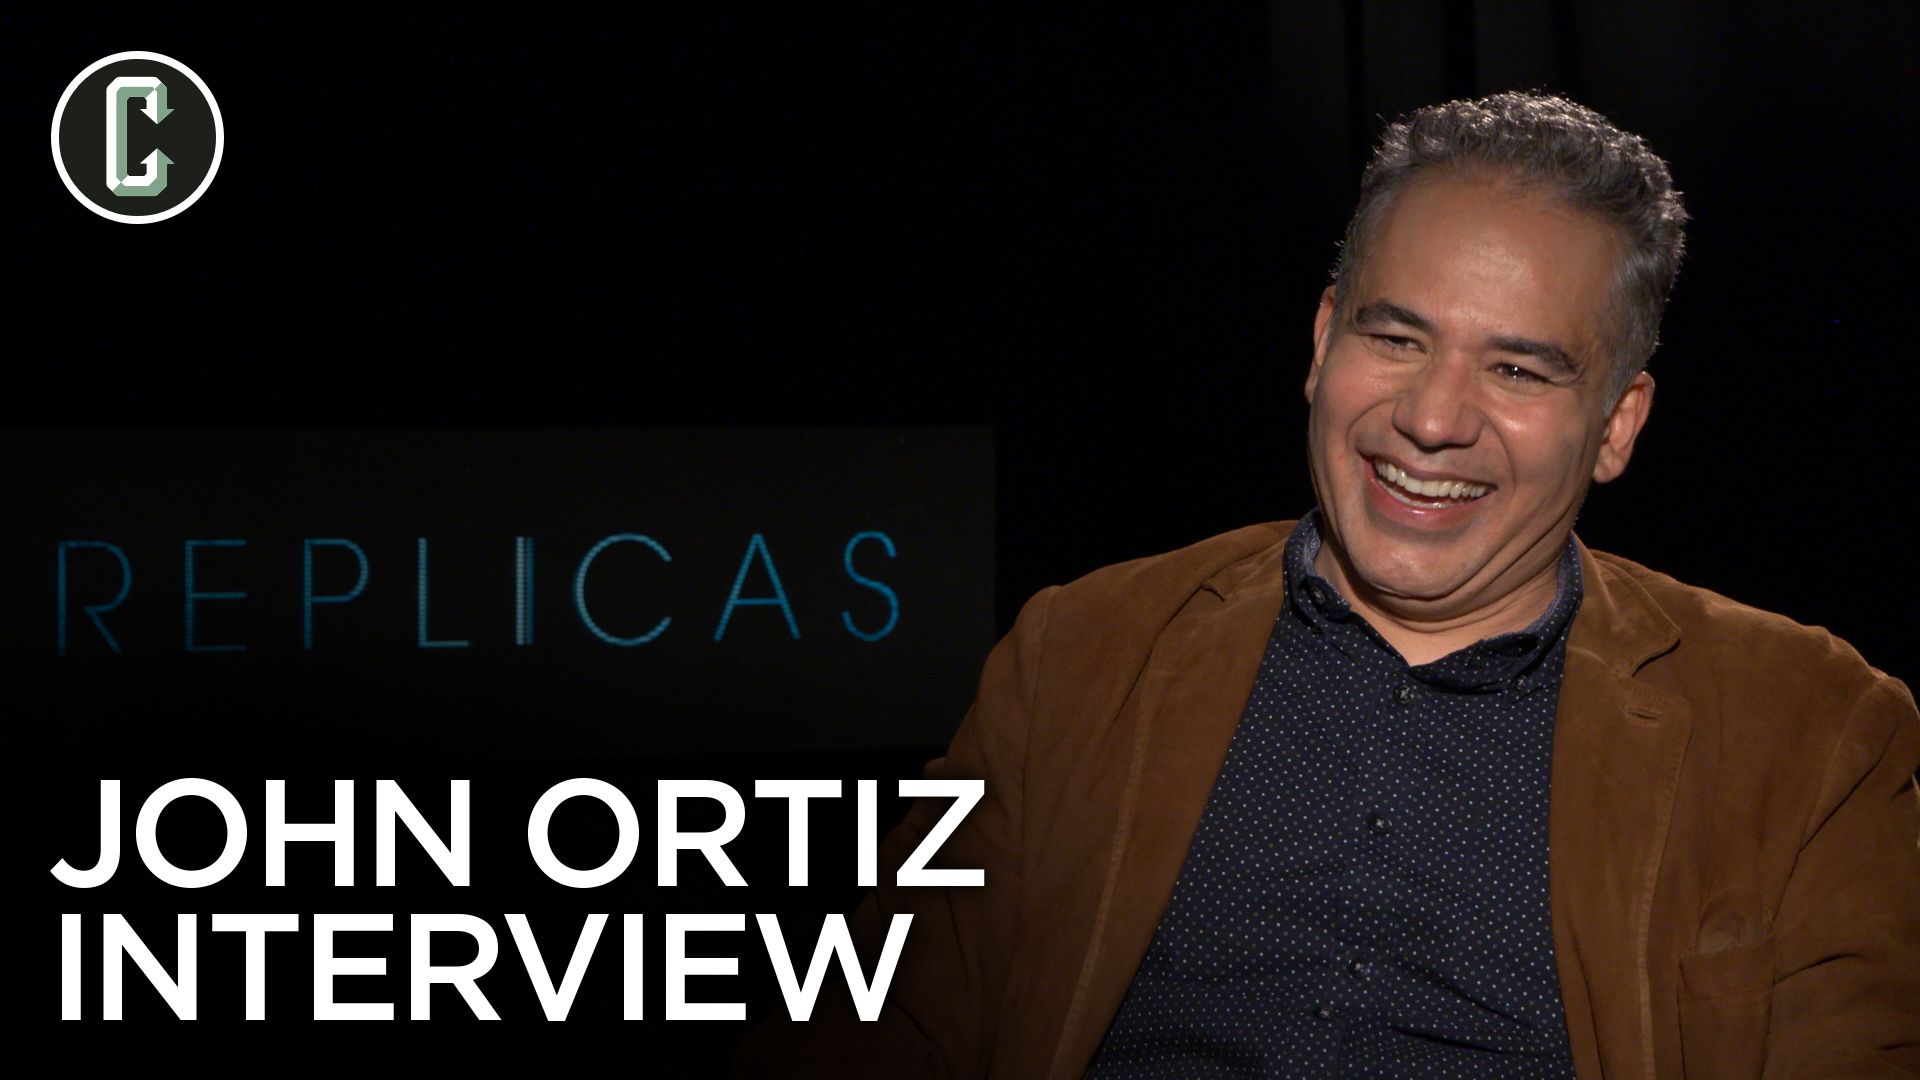 John Ortiz Shares a Great Story About Making Carlito’s Way with Al Pacino | Collider1920 x 1080